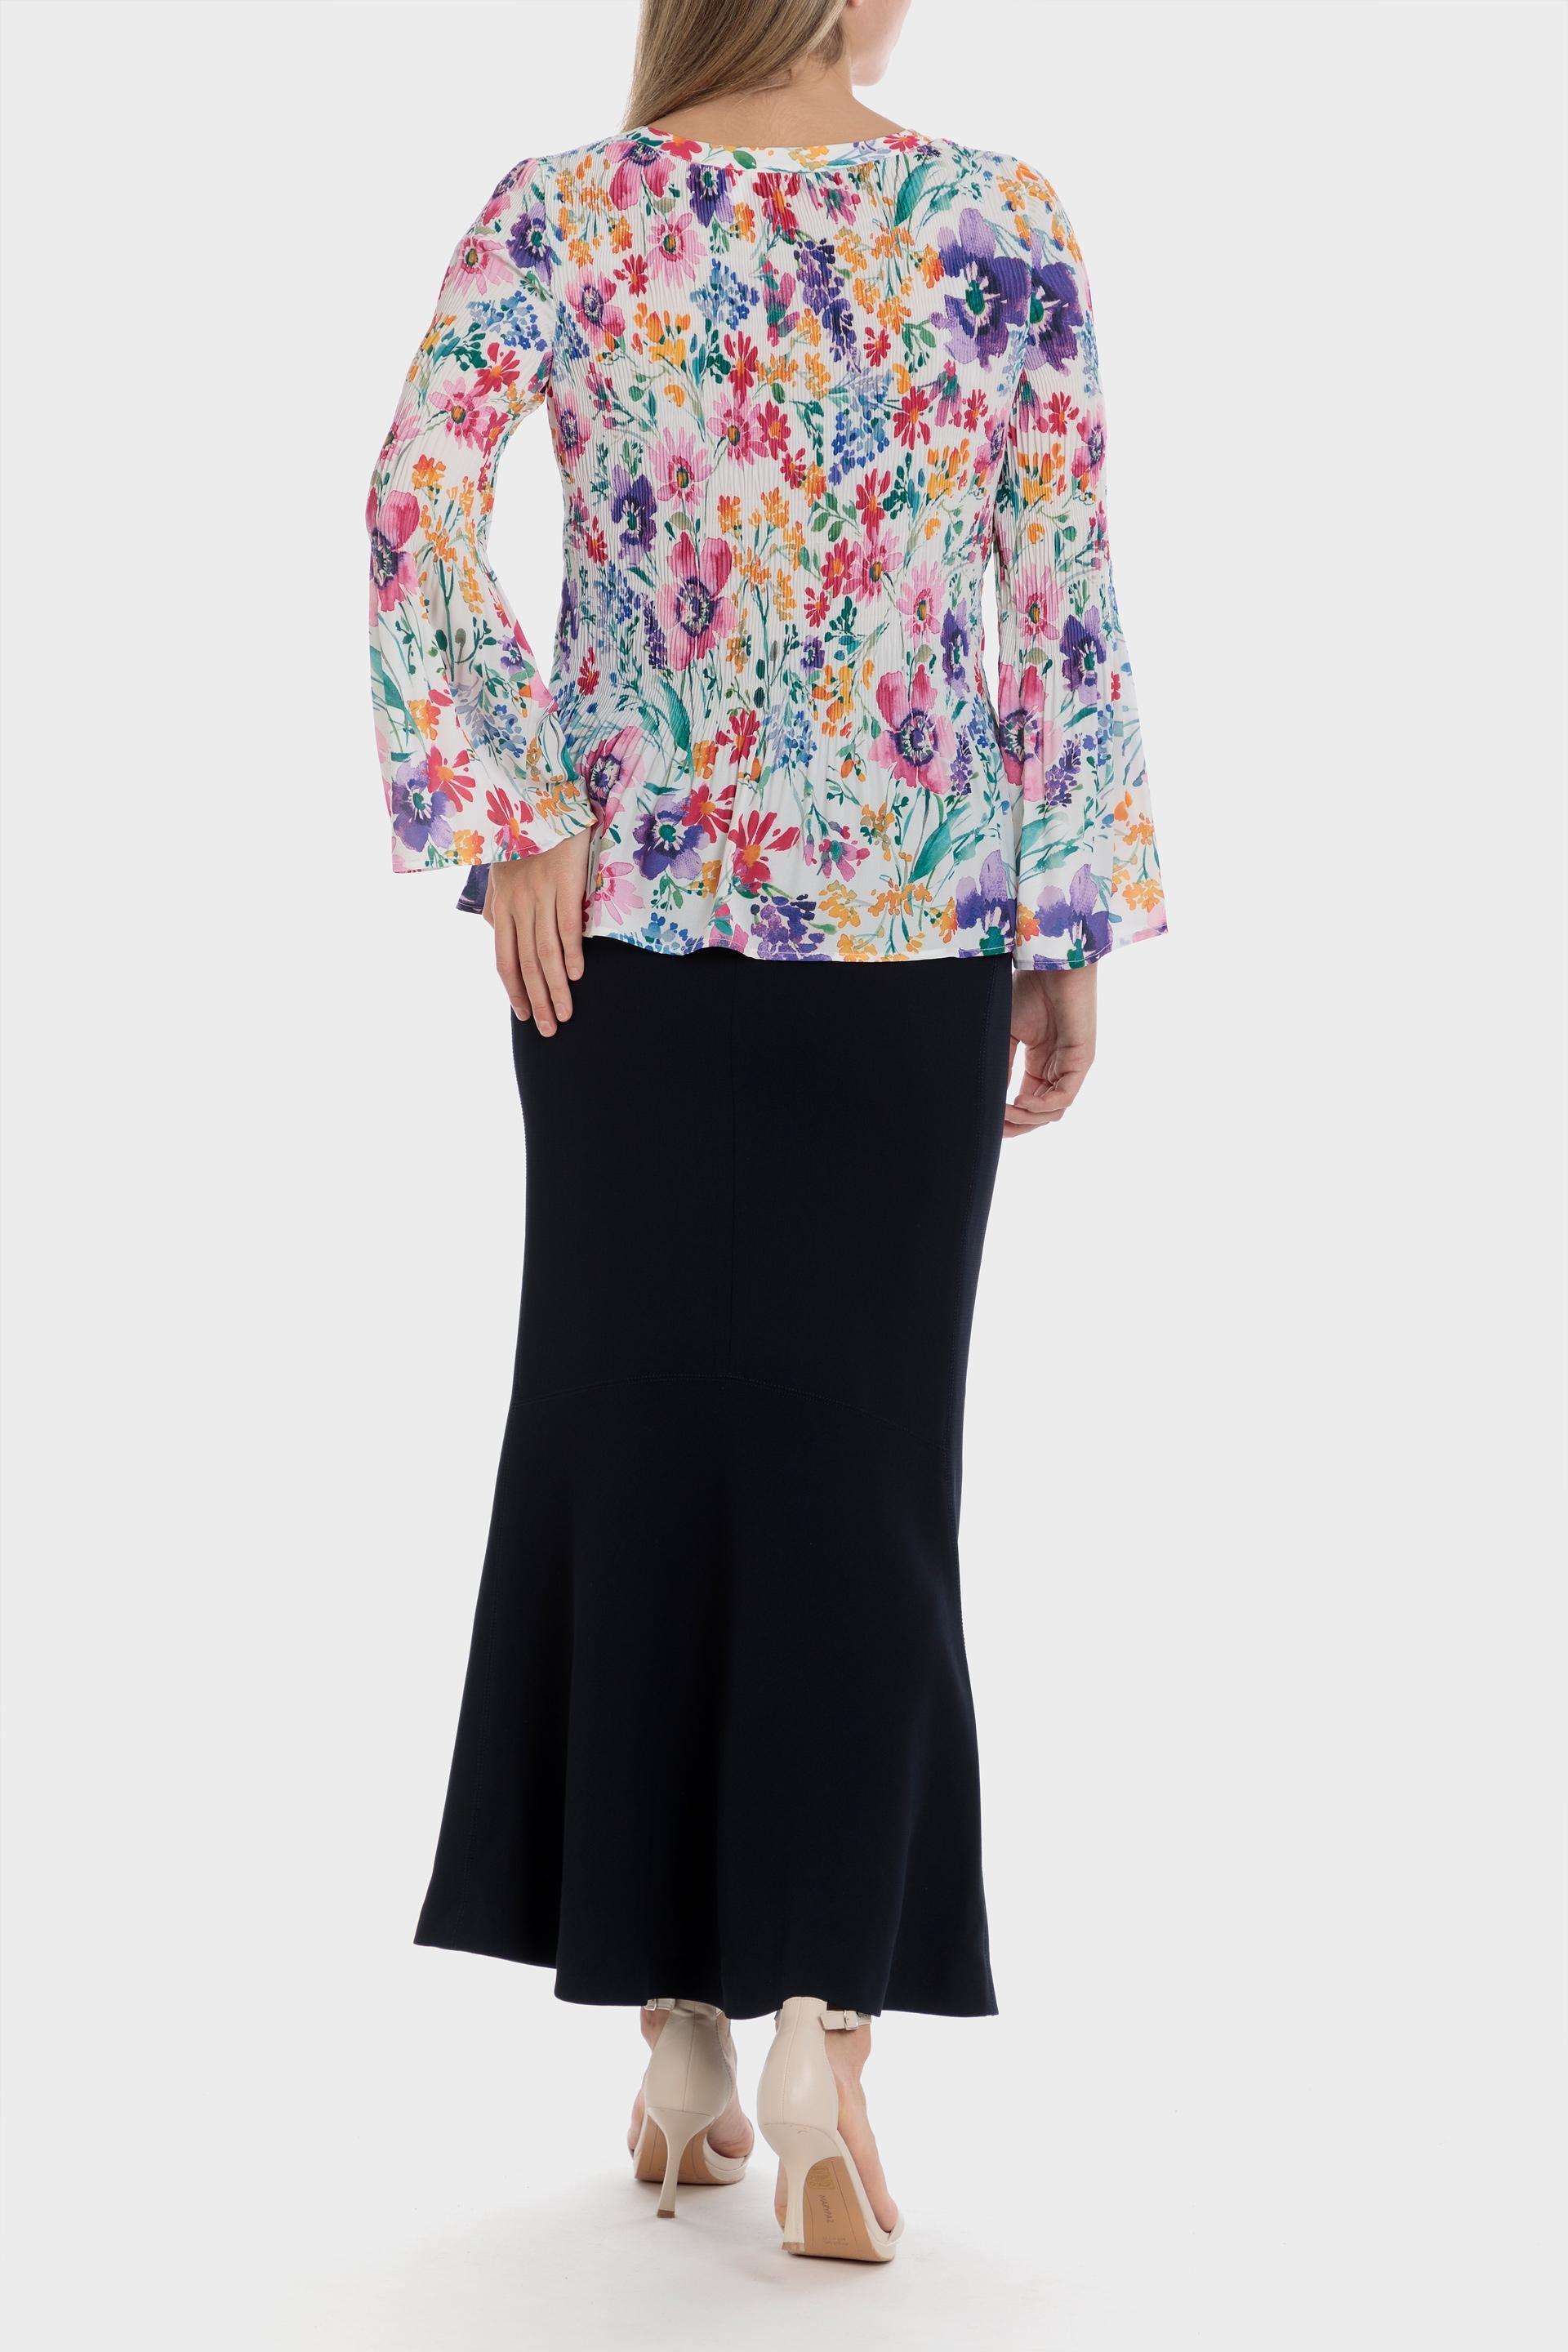 Punt Roma - Multicolour Pleated Floral Loose Fitting Blouse